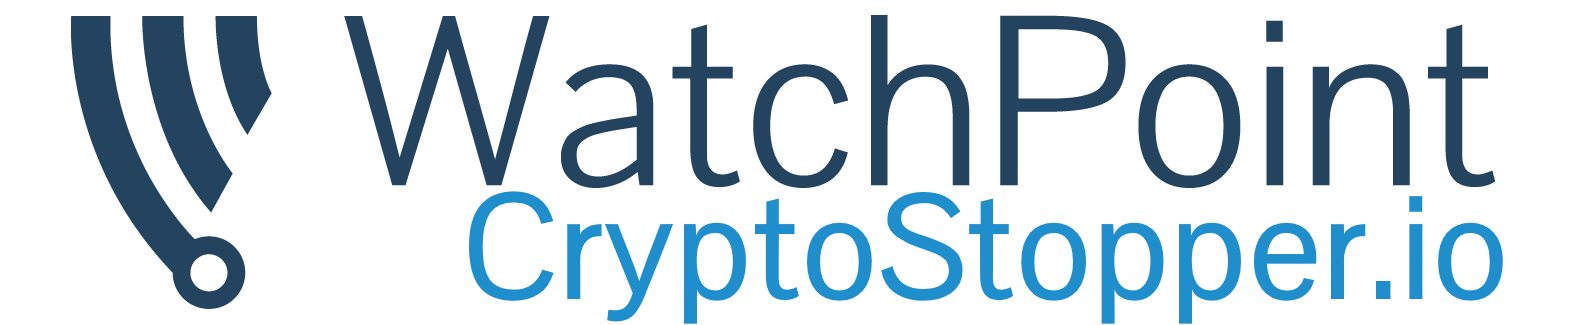 WatchPoint to Release CryptoStopper.io May 16th